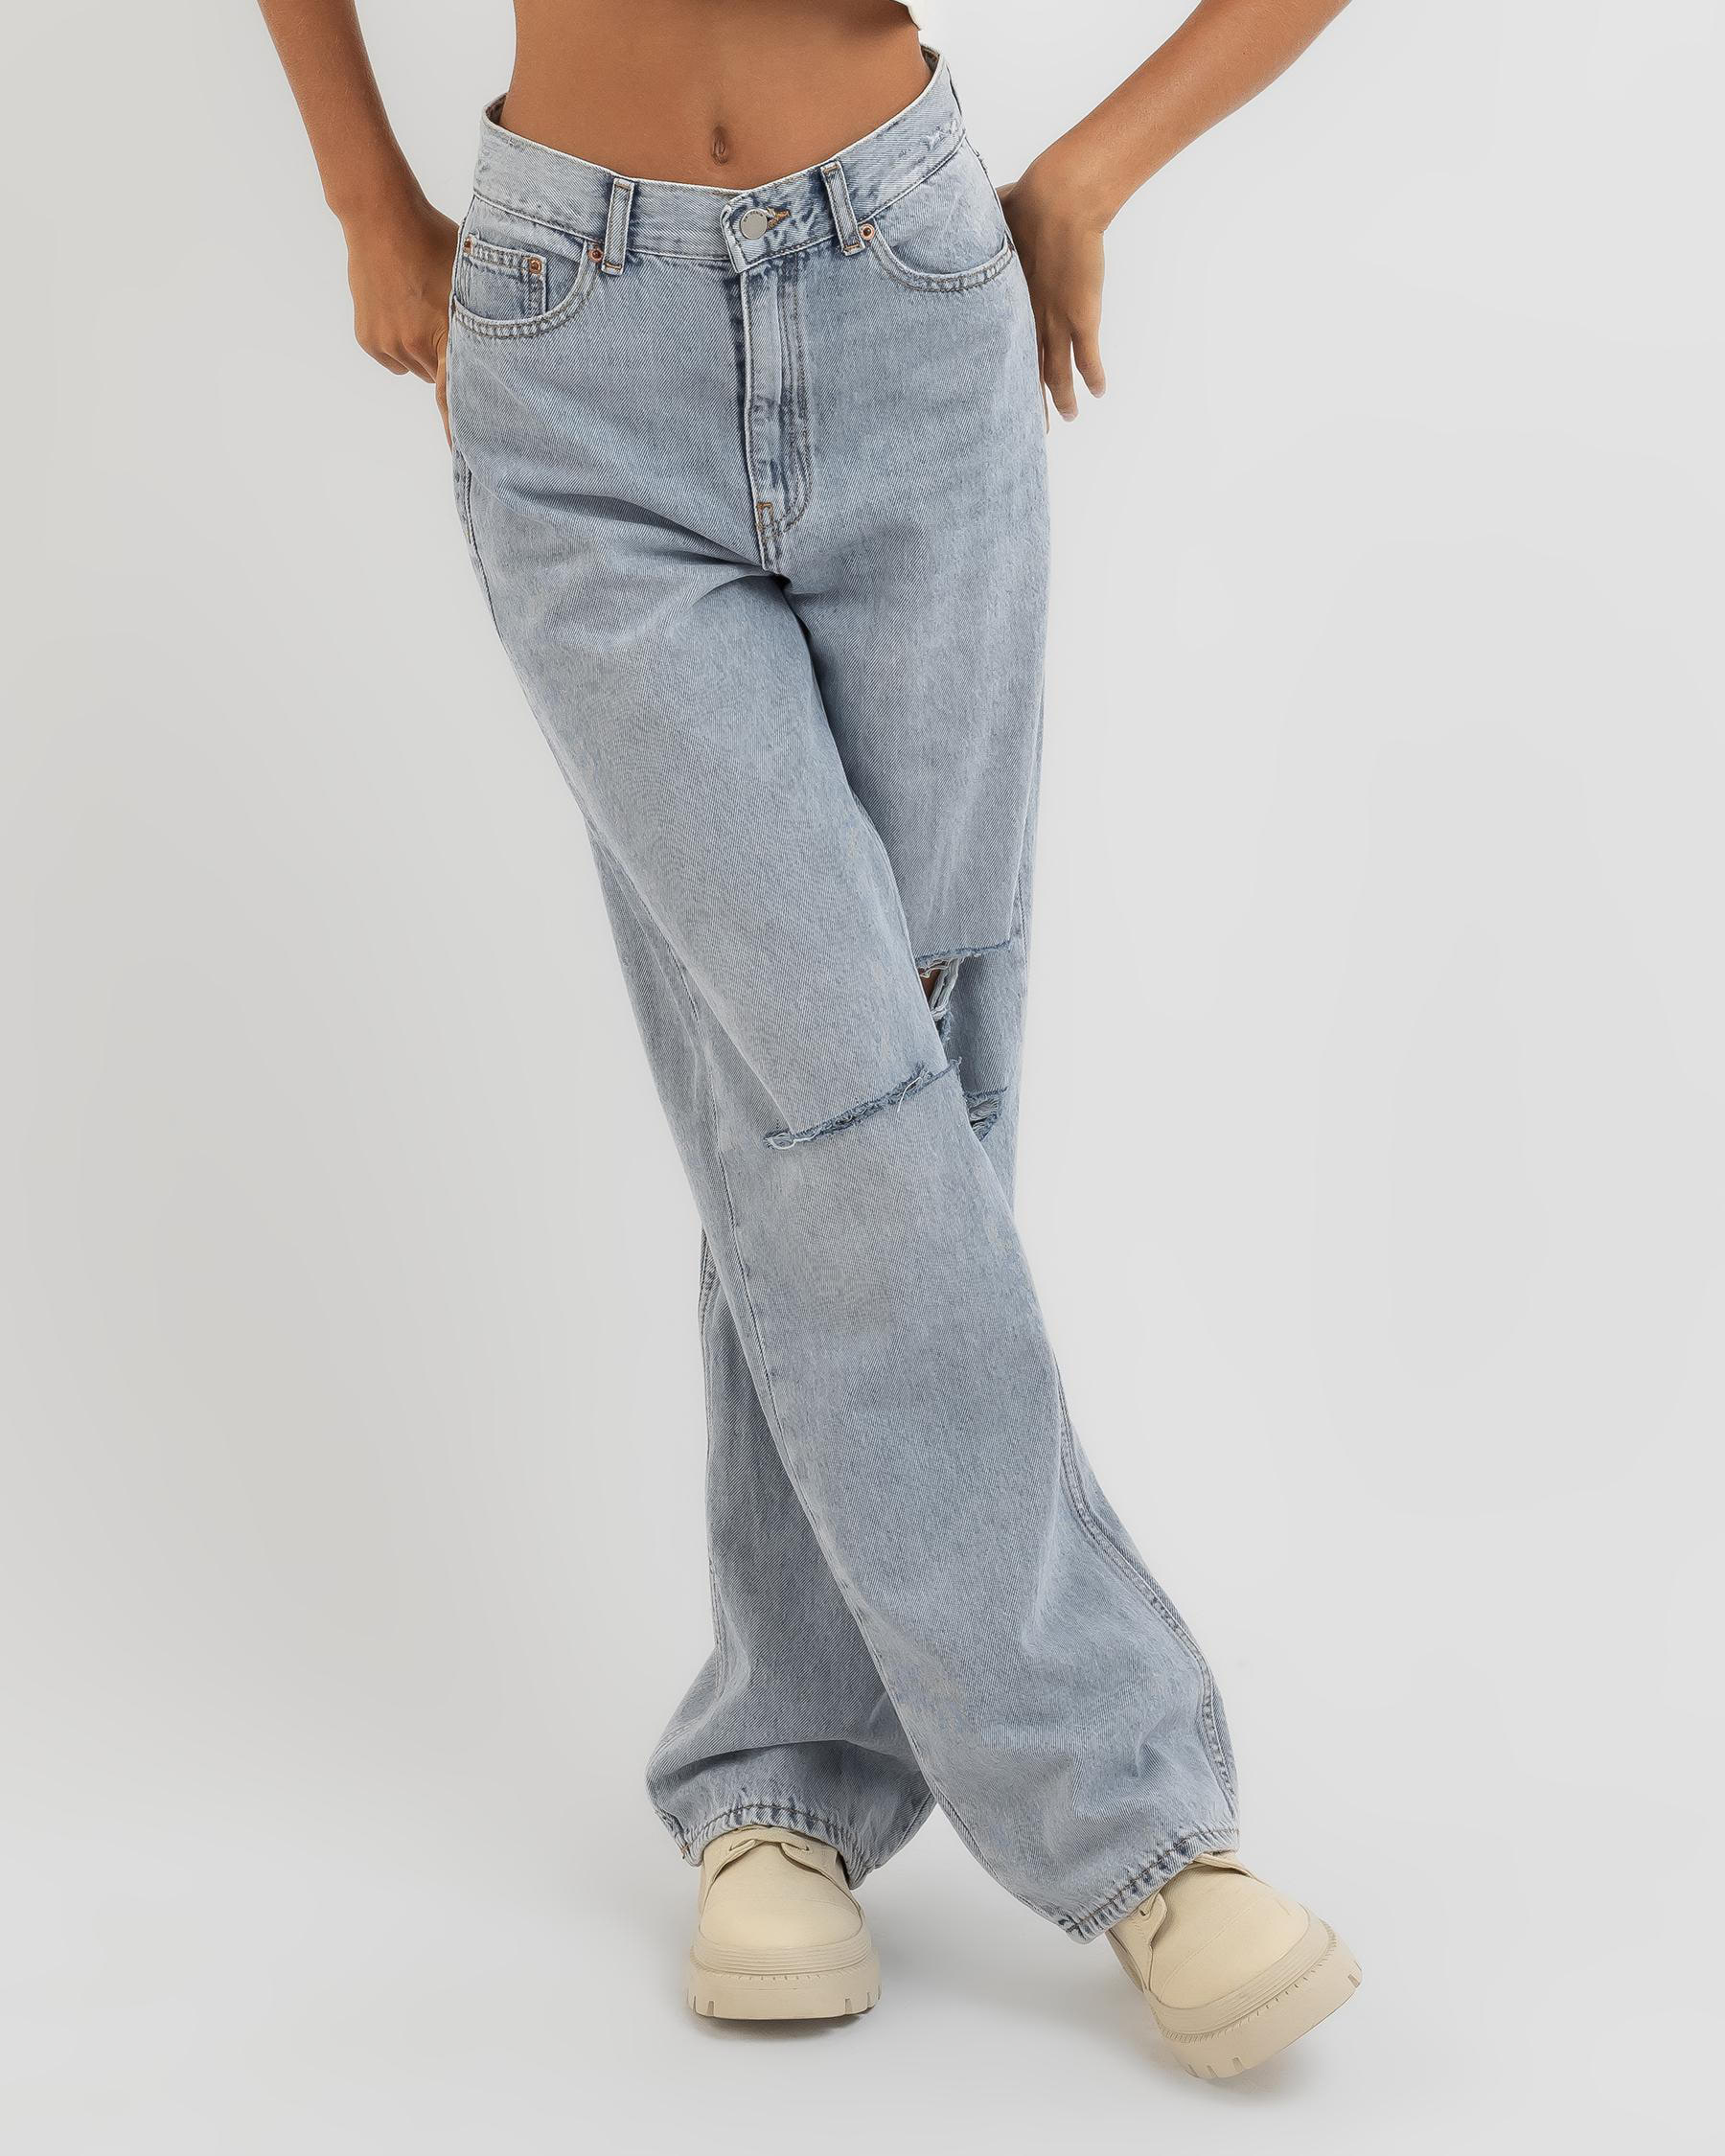 Dr Denim Echo Jeans In Bleach Sky Ripped - Fast Shipping & Easy Returns ...